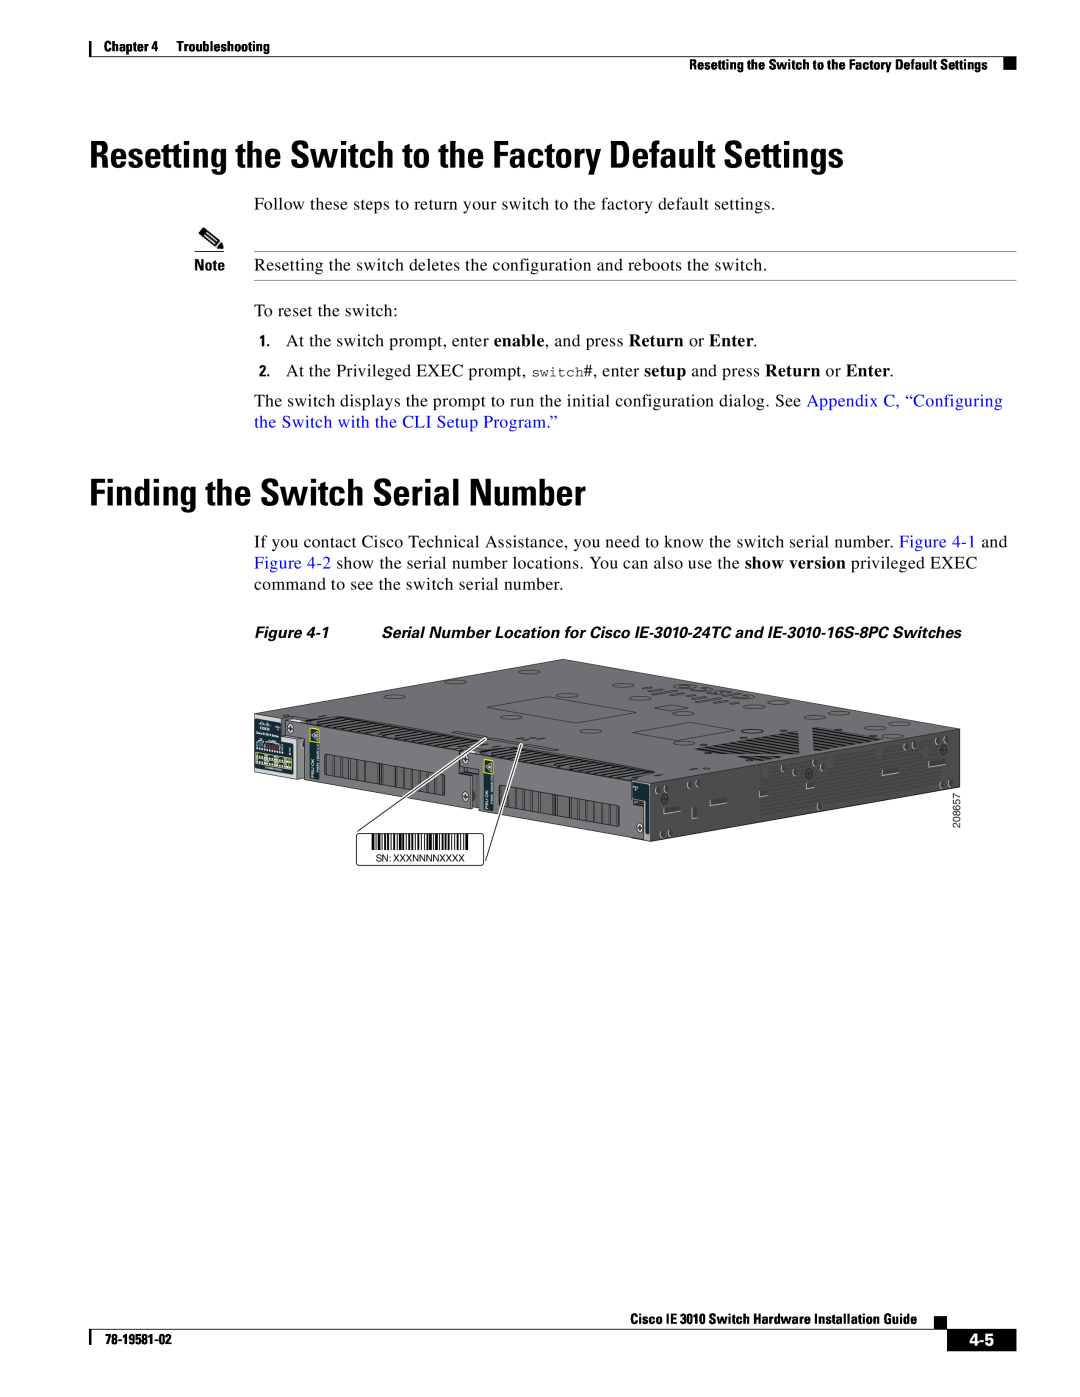 Cisco Systems IE301024TC manual Resetting the Switch to the Factory Default Settings, Finding the Switch Serial Number 